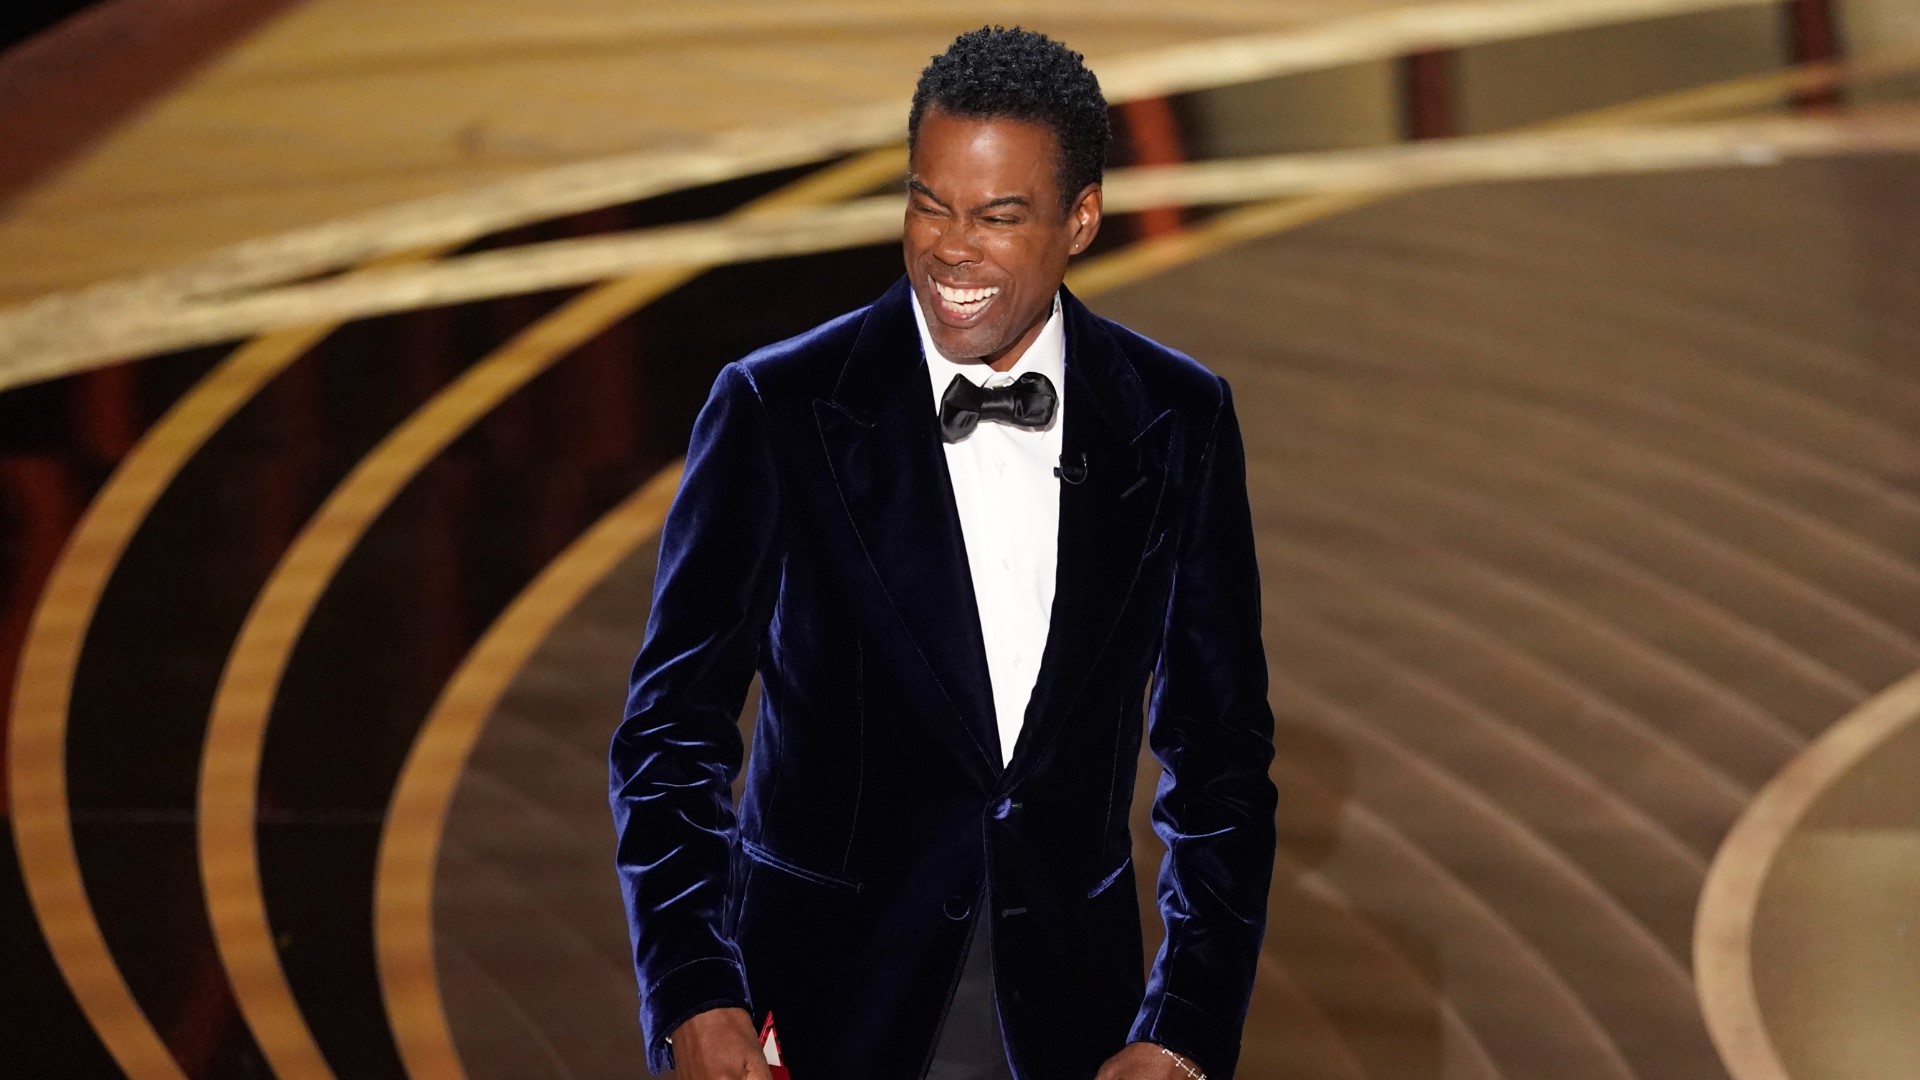 Chris Rock has remained silent so far on the slap, though the LAPD said the comedian declined to file a police report after Will Smith hit him on stage.